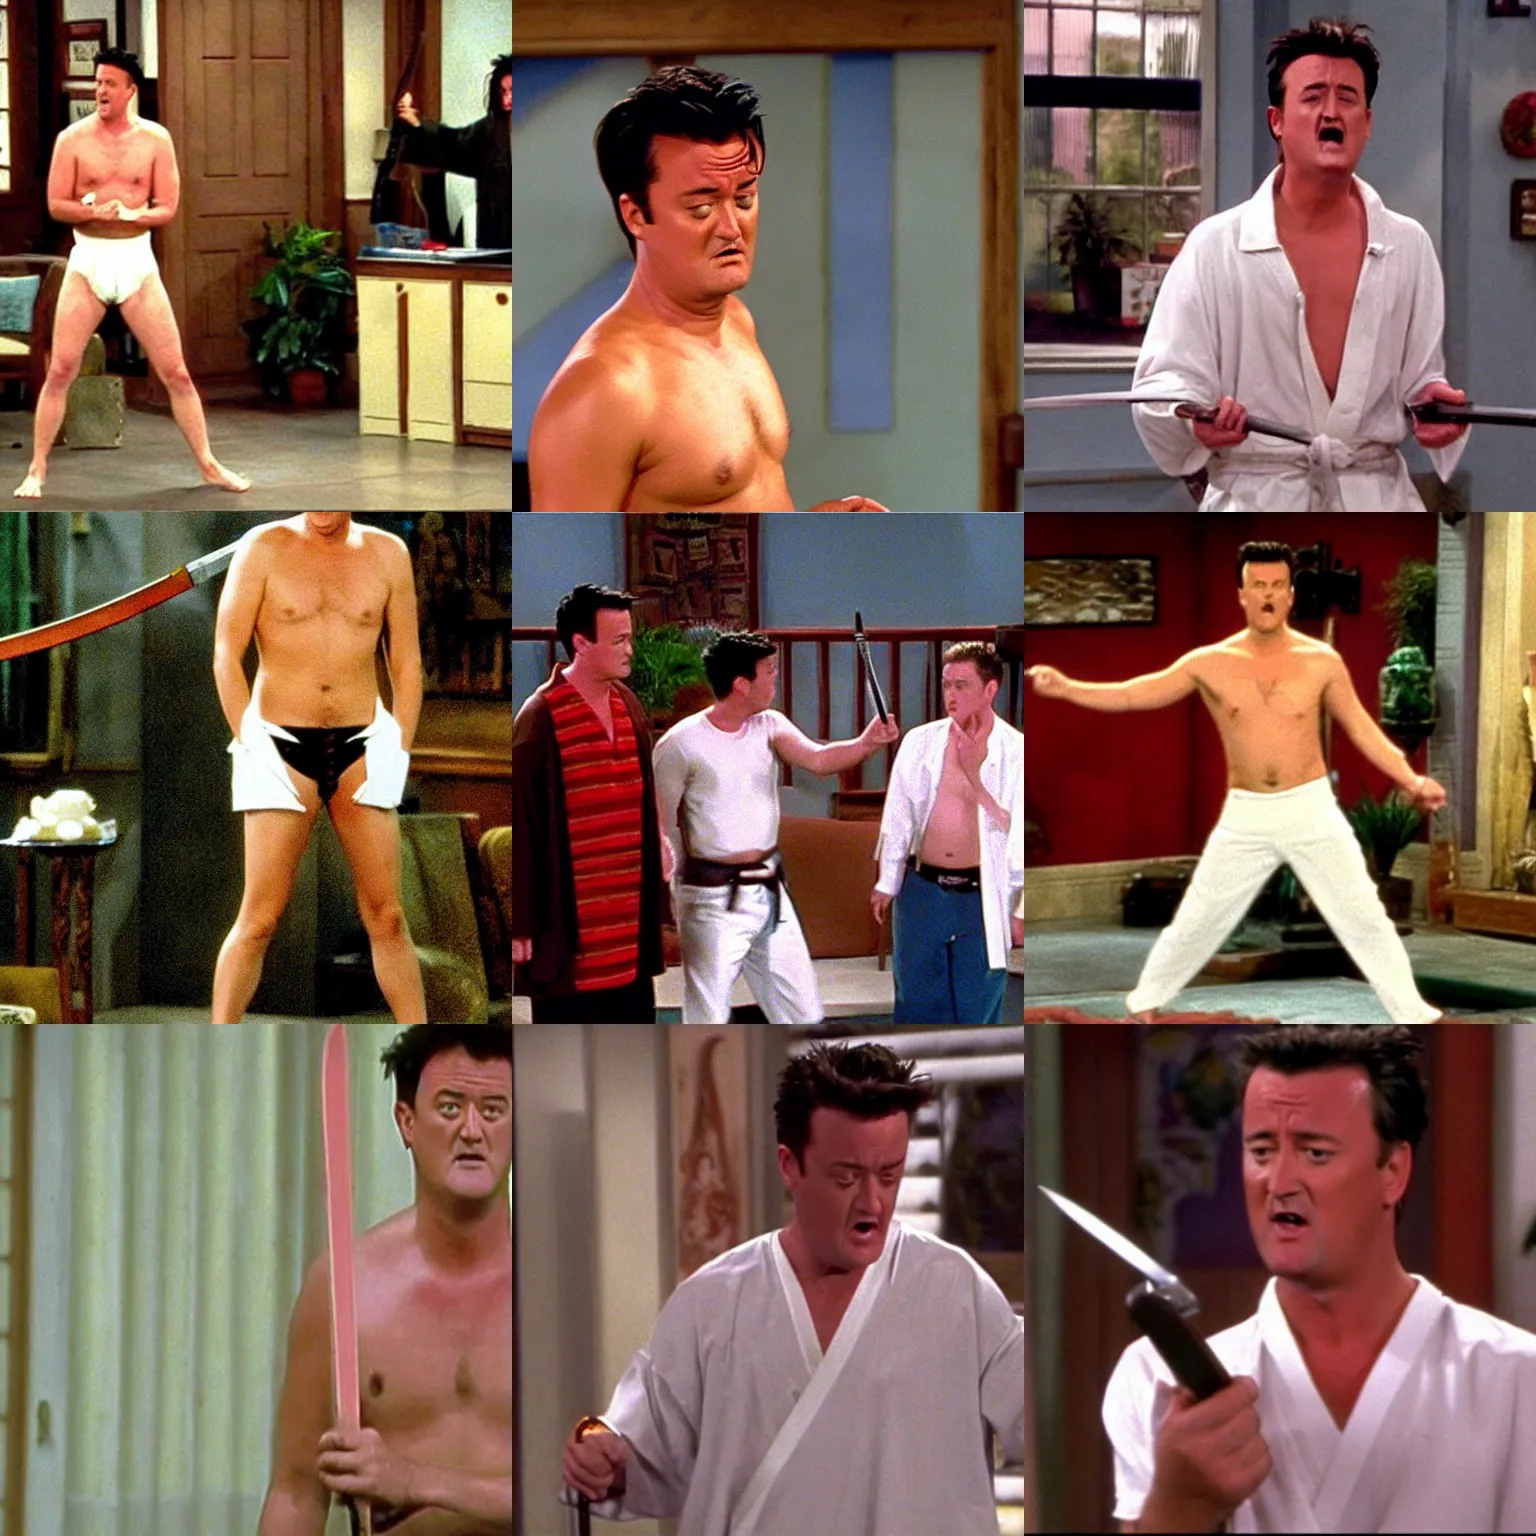 Prompt: chandler bing extremely angry wearing nothing but white y - fronts holding a samurai sword,'friends'9 0 s tv show screenshot